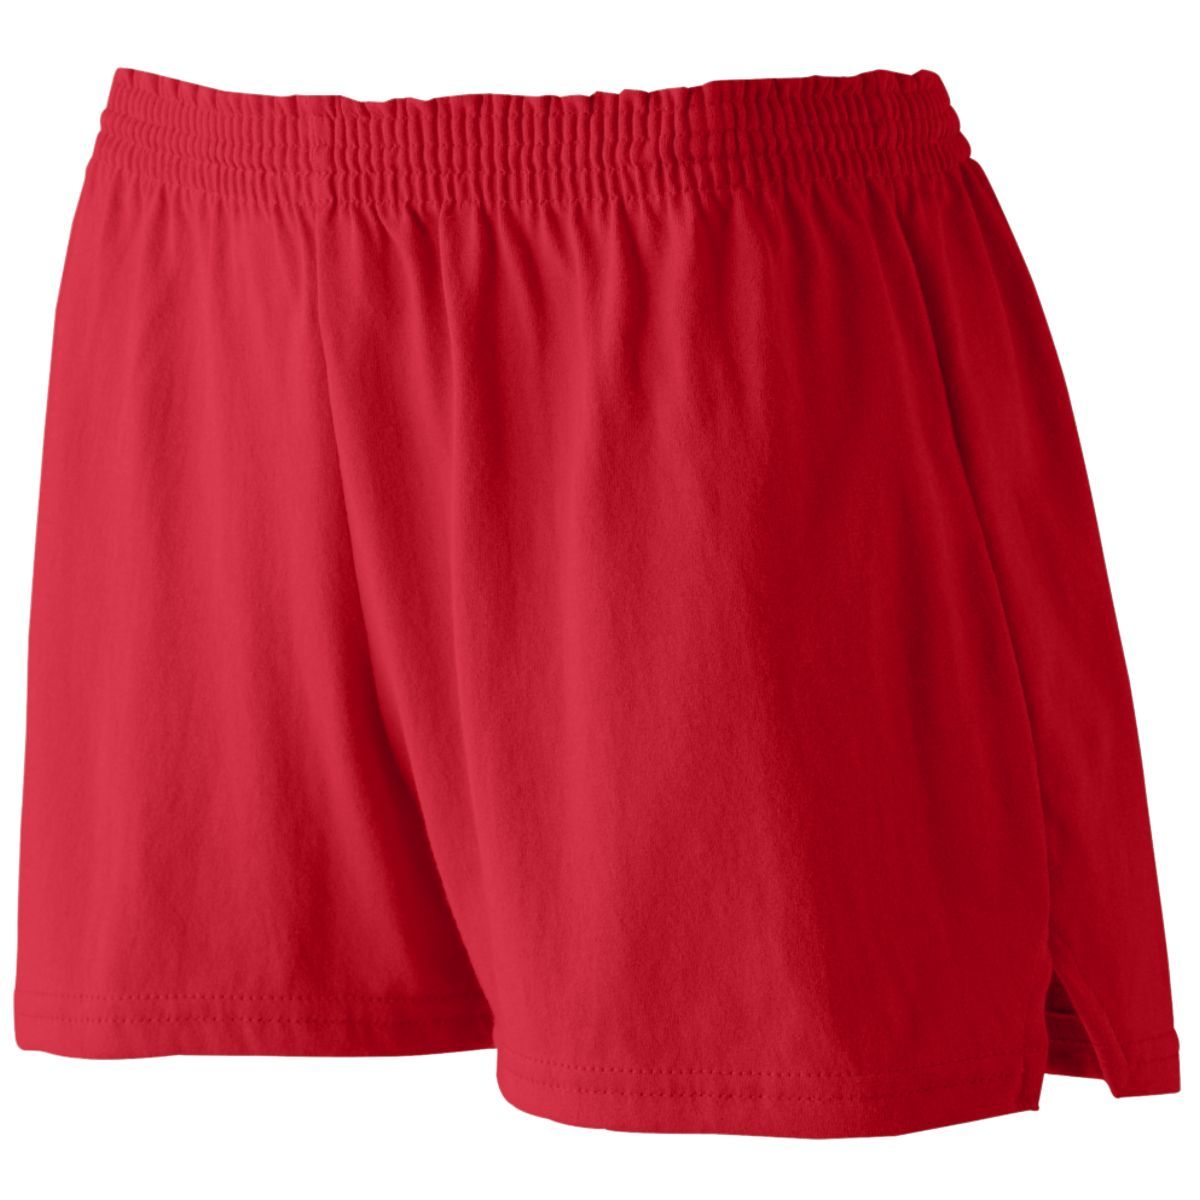 Augusta Sportswear Girls Jersey Shorts in Red  -Part of the Girls, Augusta-Products, Girls-Shorts product lines at KanaleyCreations.com